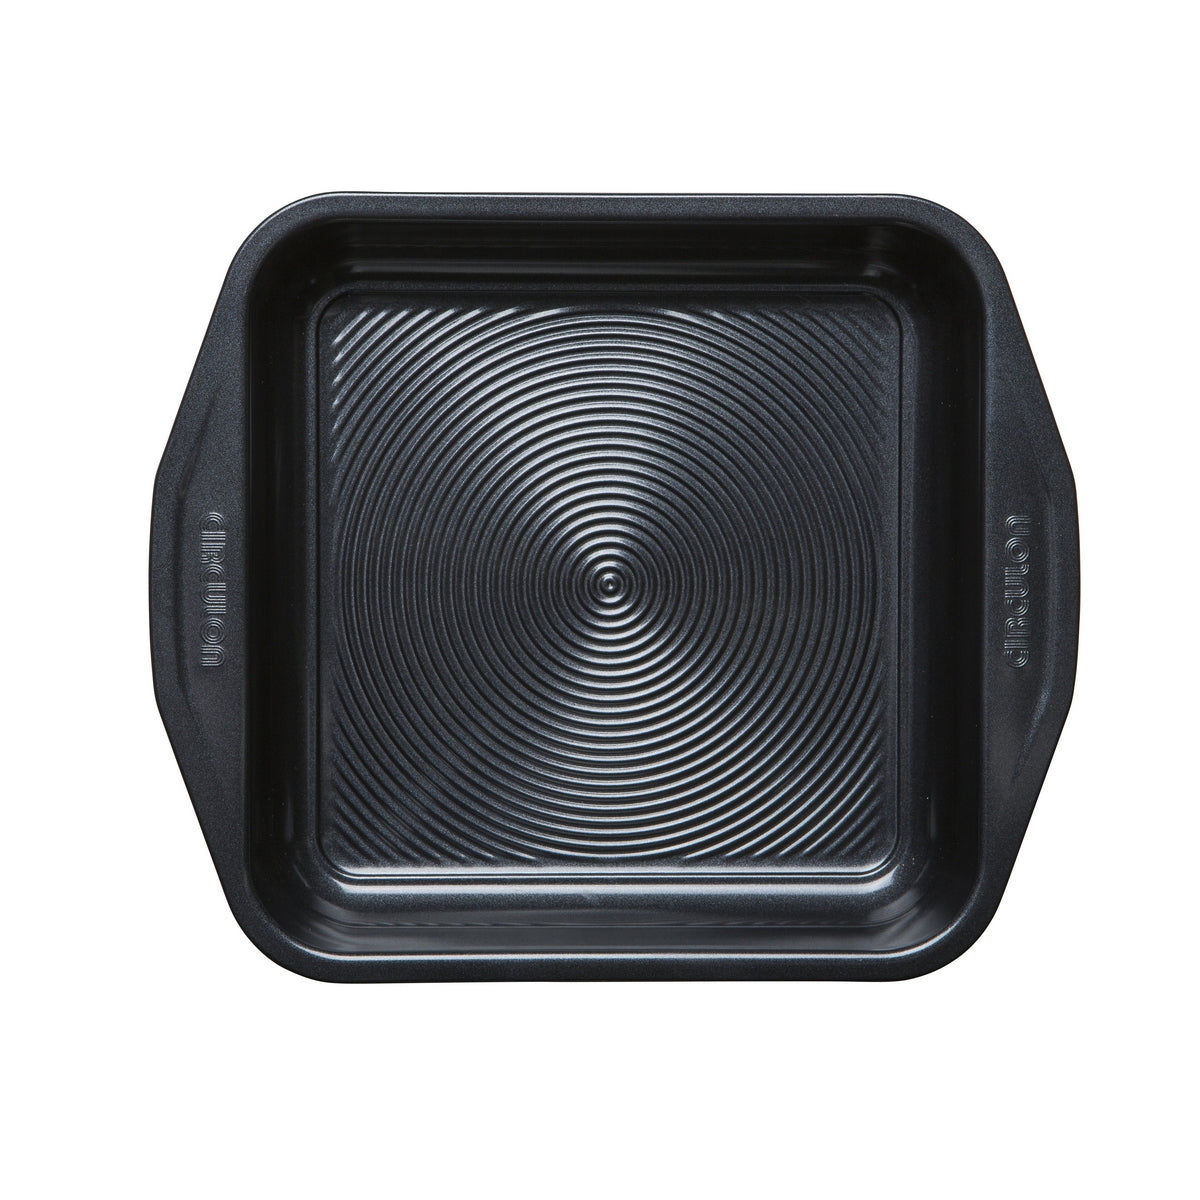 Top down view of a square cake tin showing the iconic Circulon circles